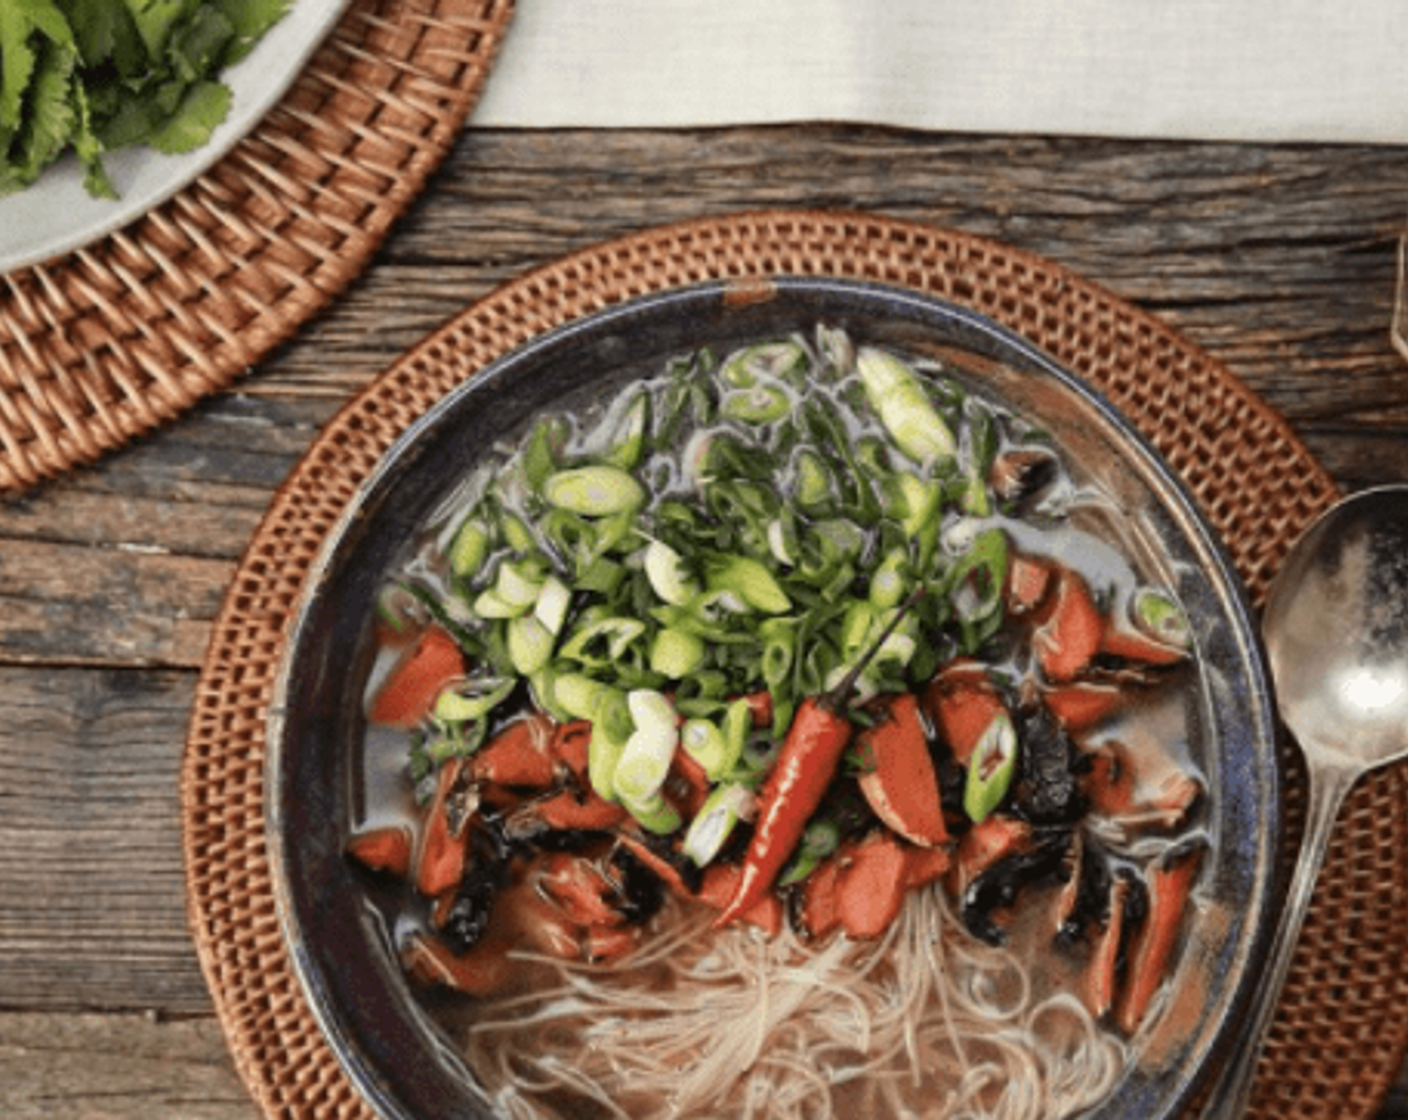 Faux “Pho” with Rice Noodles, Mung Bean Sprouts, Charred Carrots and Spring Onions